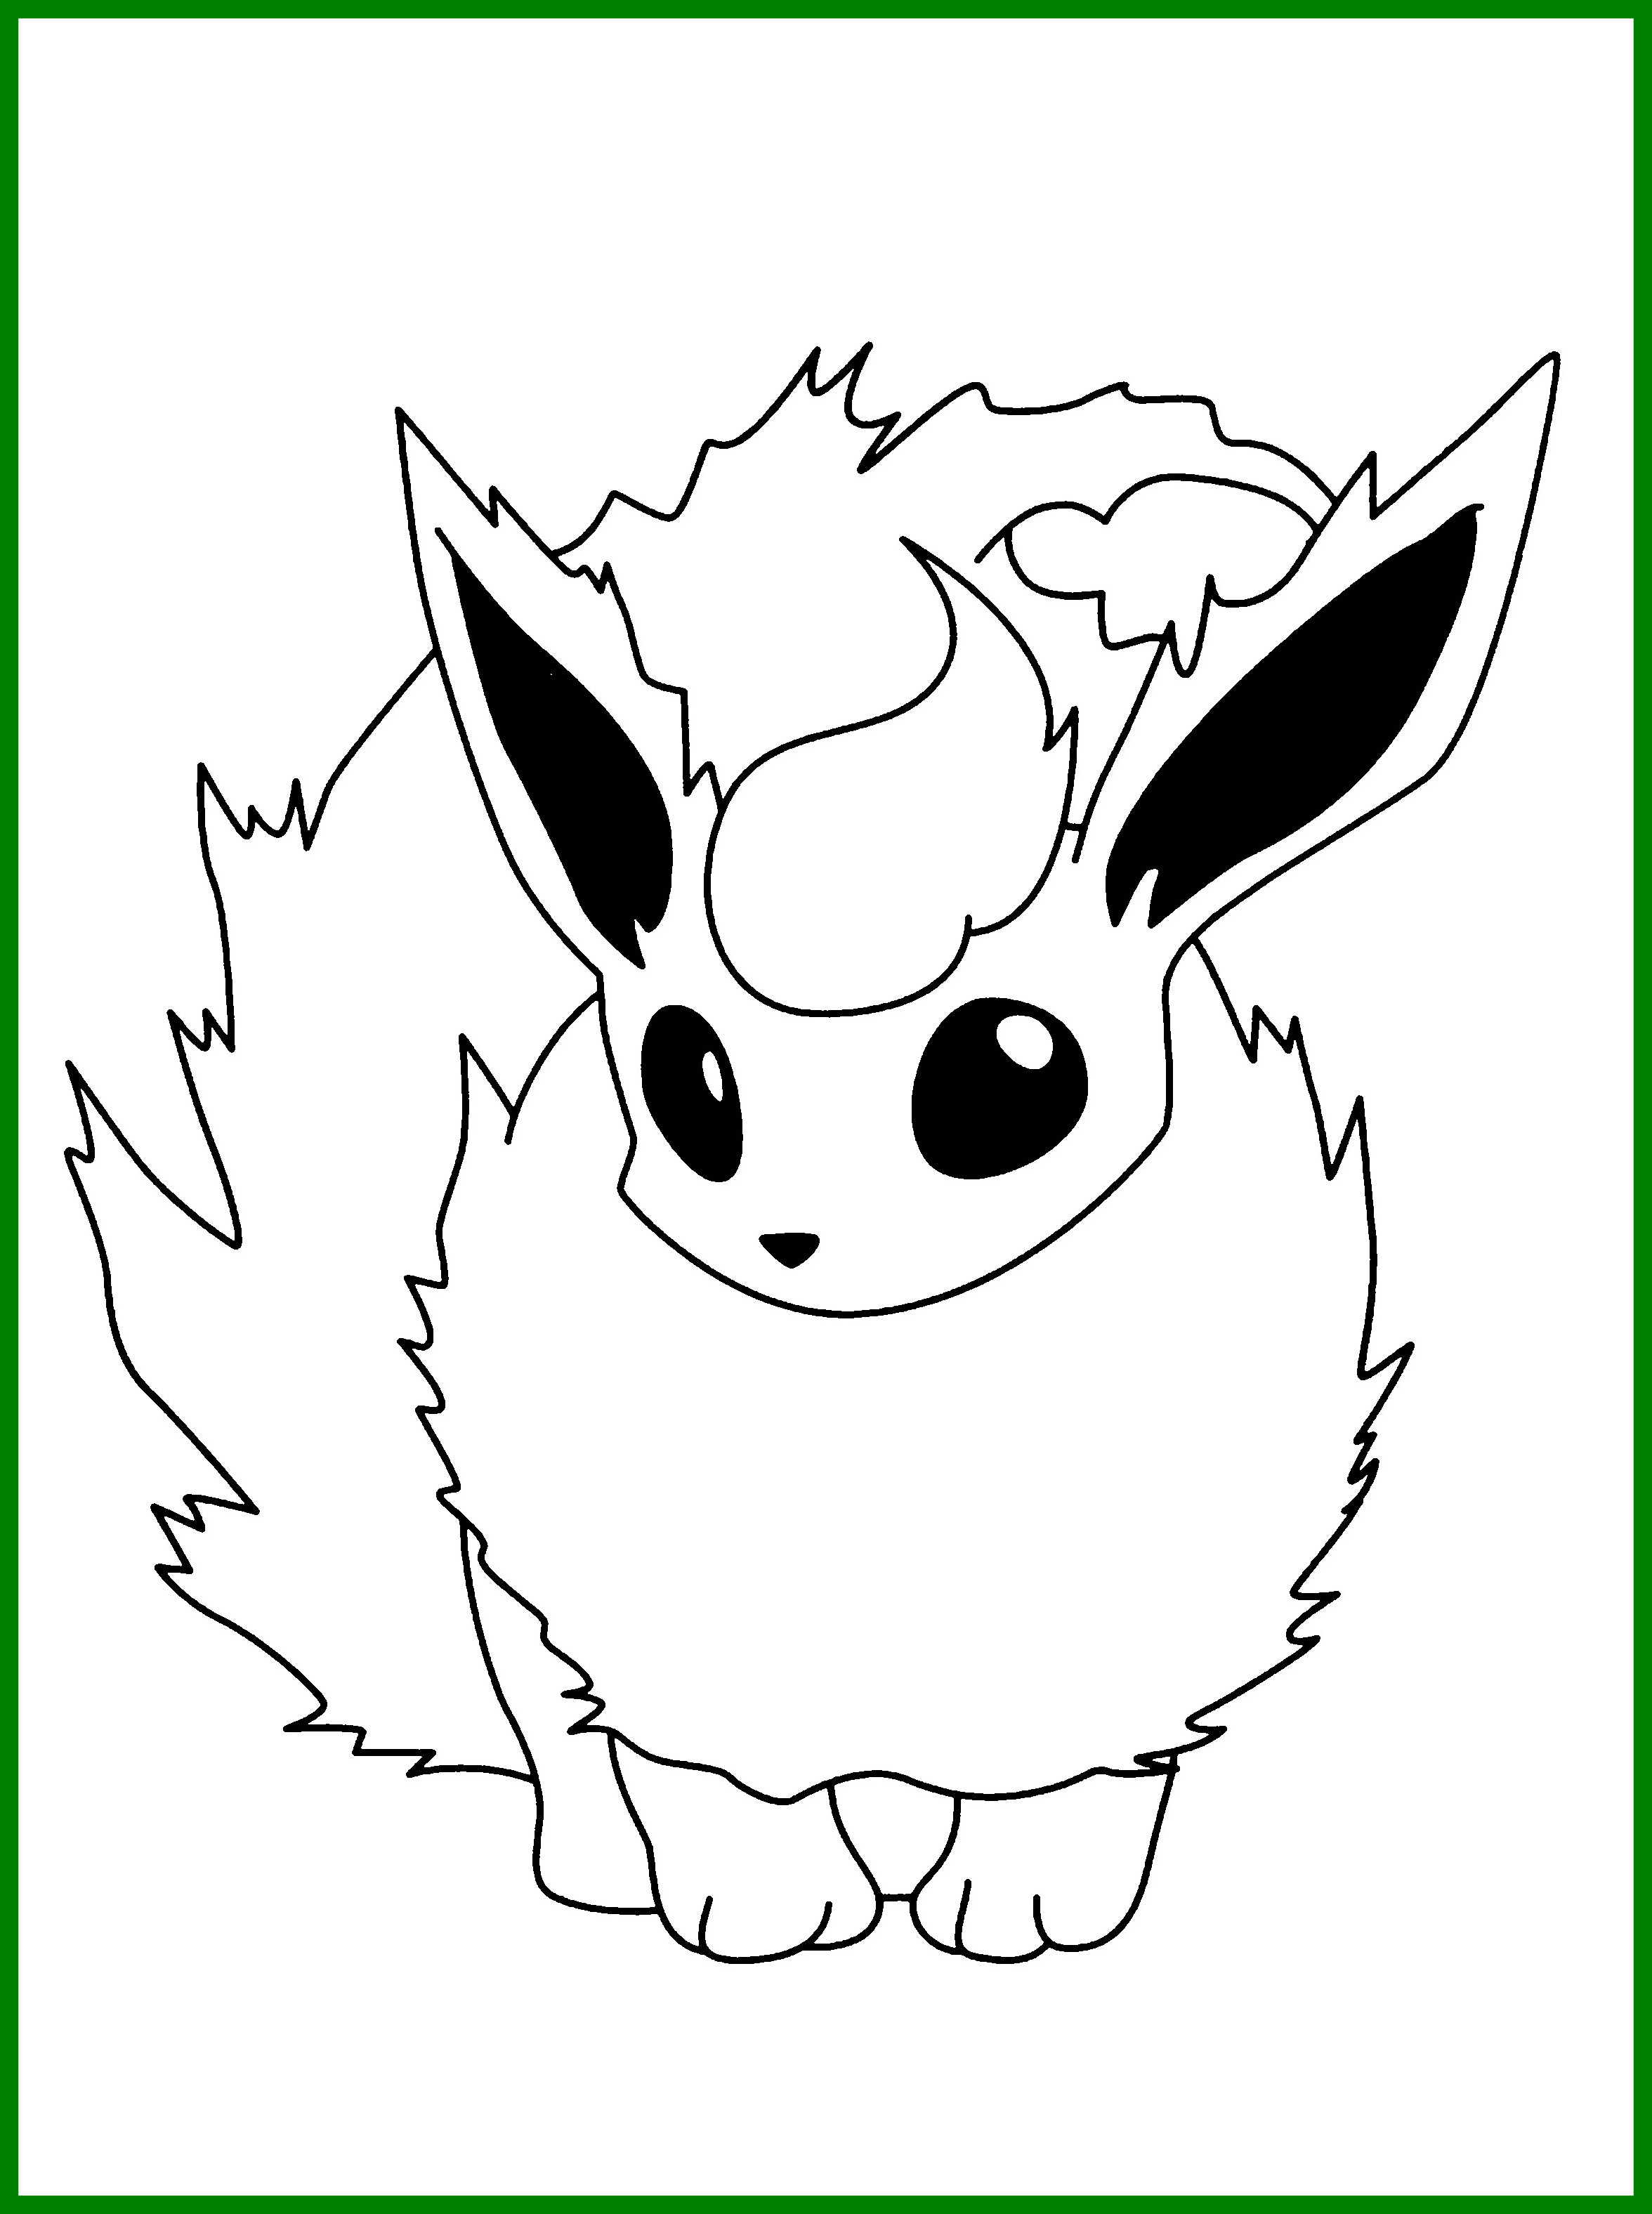 Zorua Coloring Pages at GetColorings.com | Free printable colorings